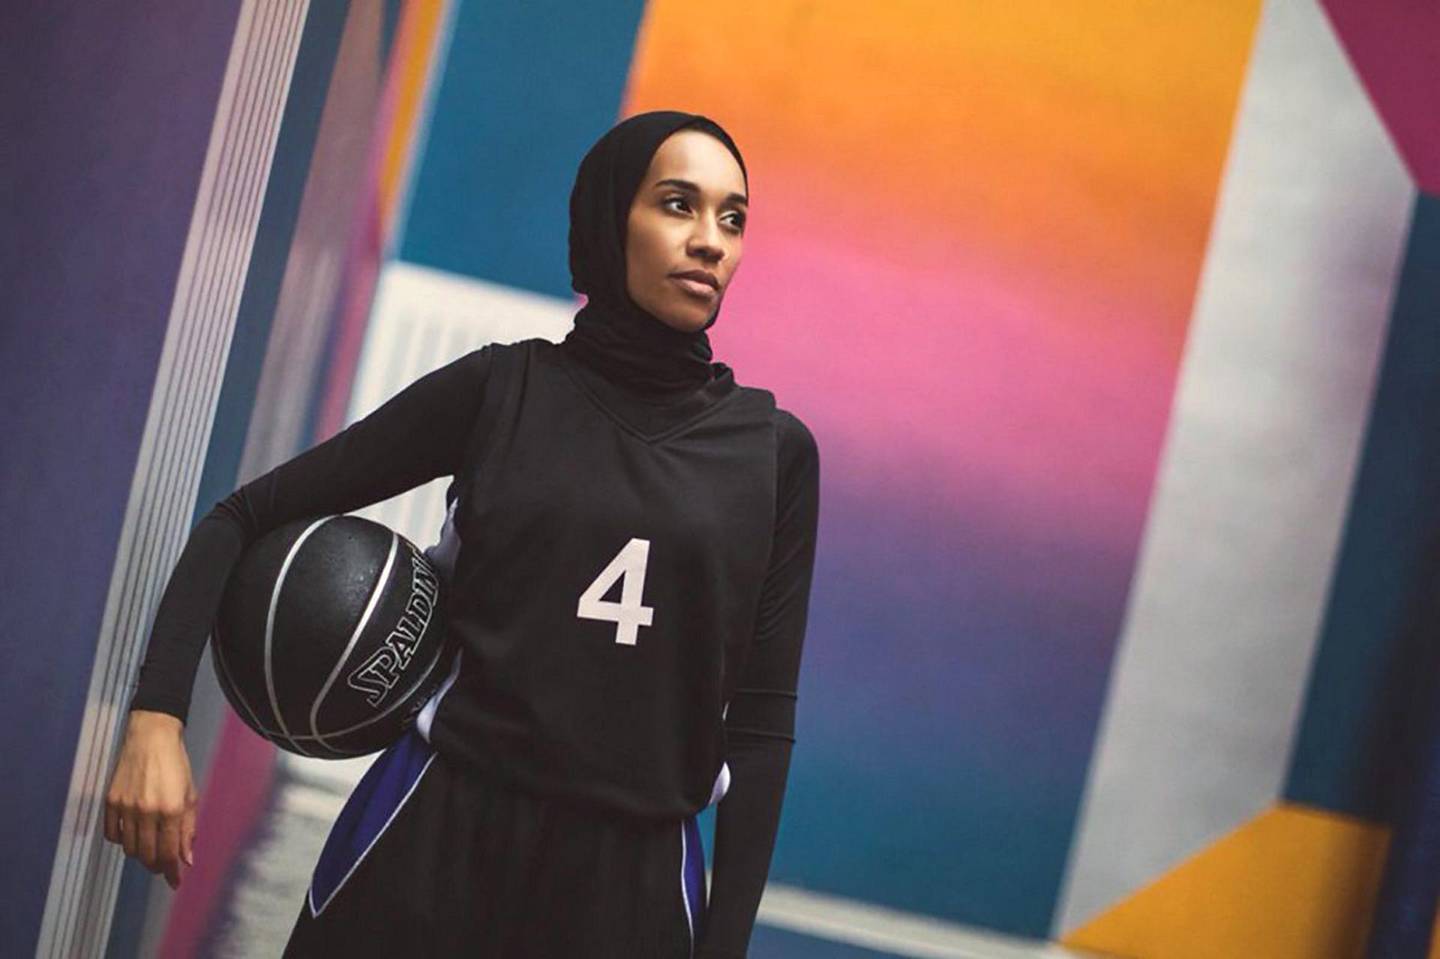 The campaign to end a ban on hijabs by the governing body of basketball earnt Asma Elbadawi many accolades, leaving a legacy for young Muslim women to realise their dreams of taking to the court at the highest levels. Courtesy Asma Elbadawi